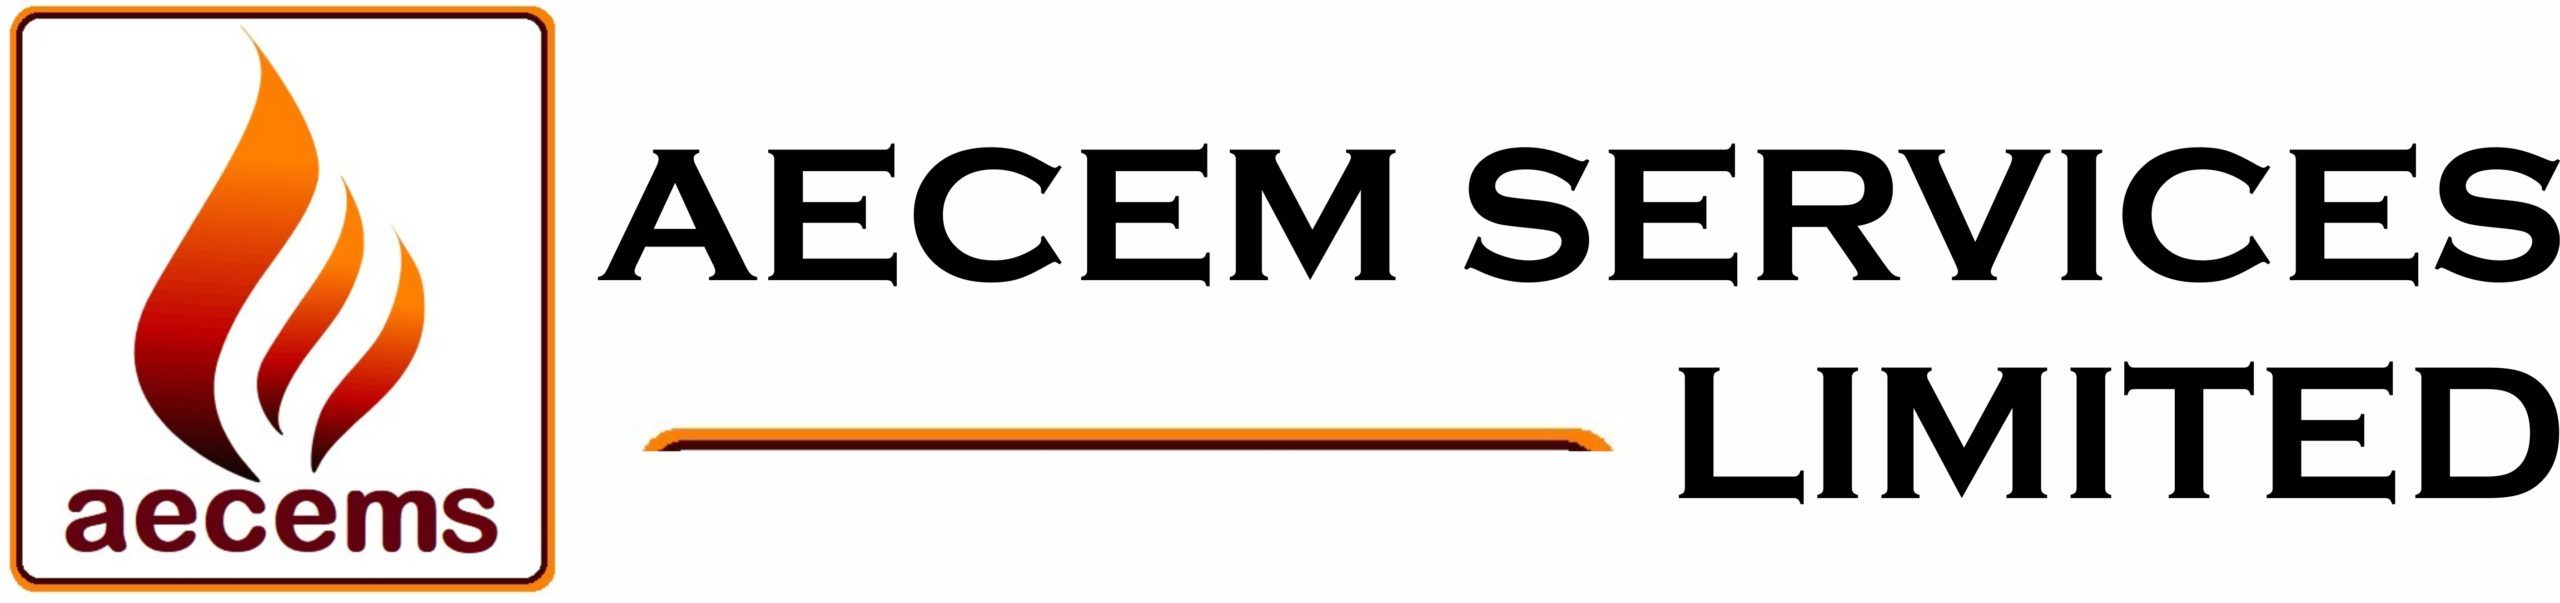 Aecem Services Limited